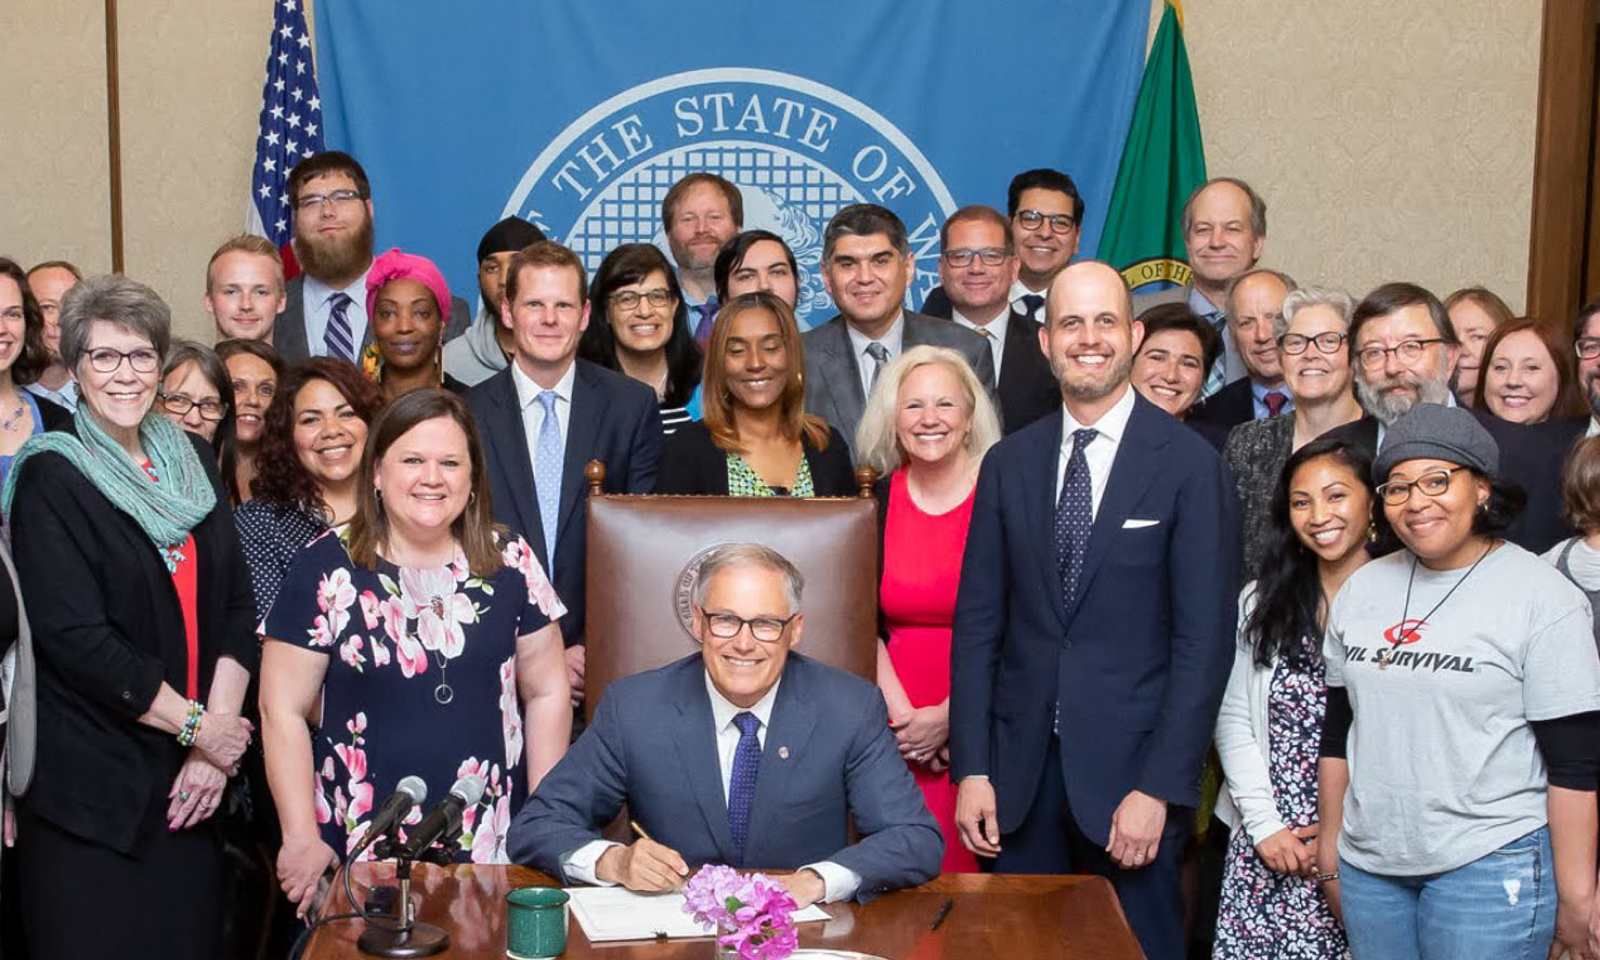 Tarra Simmons stands beside Washington Governor Jay Inslee, who is signing the New Hope Act bill